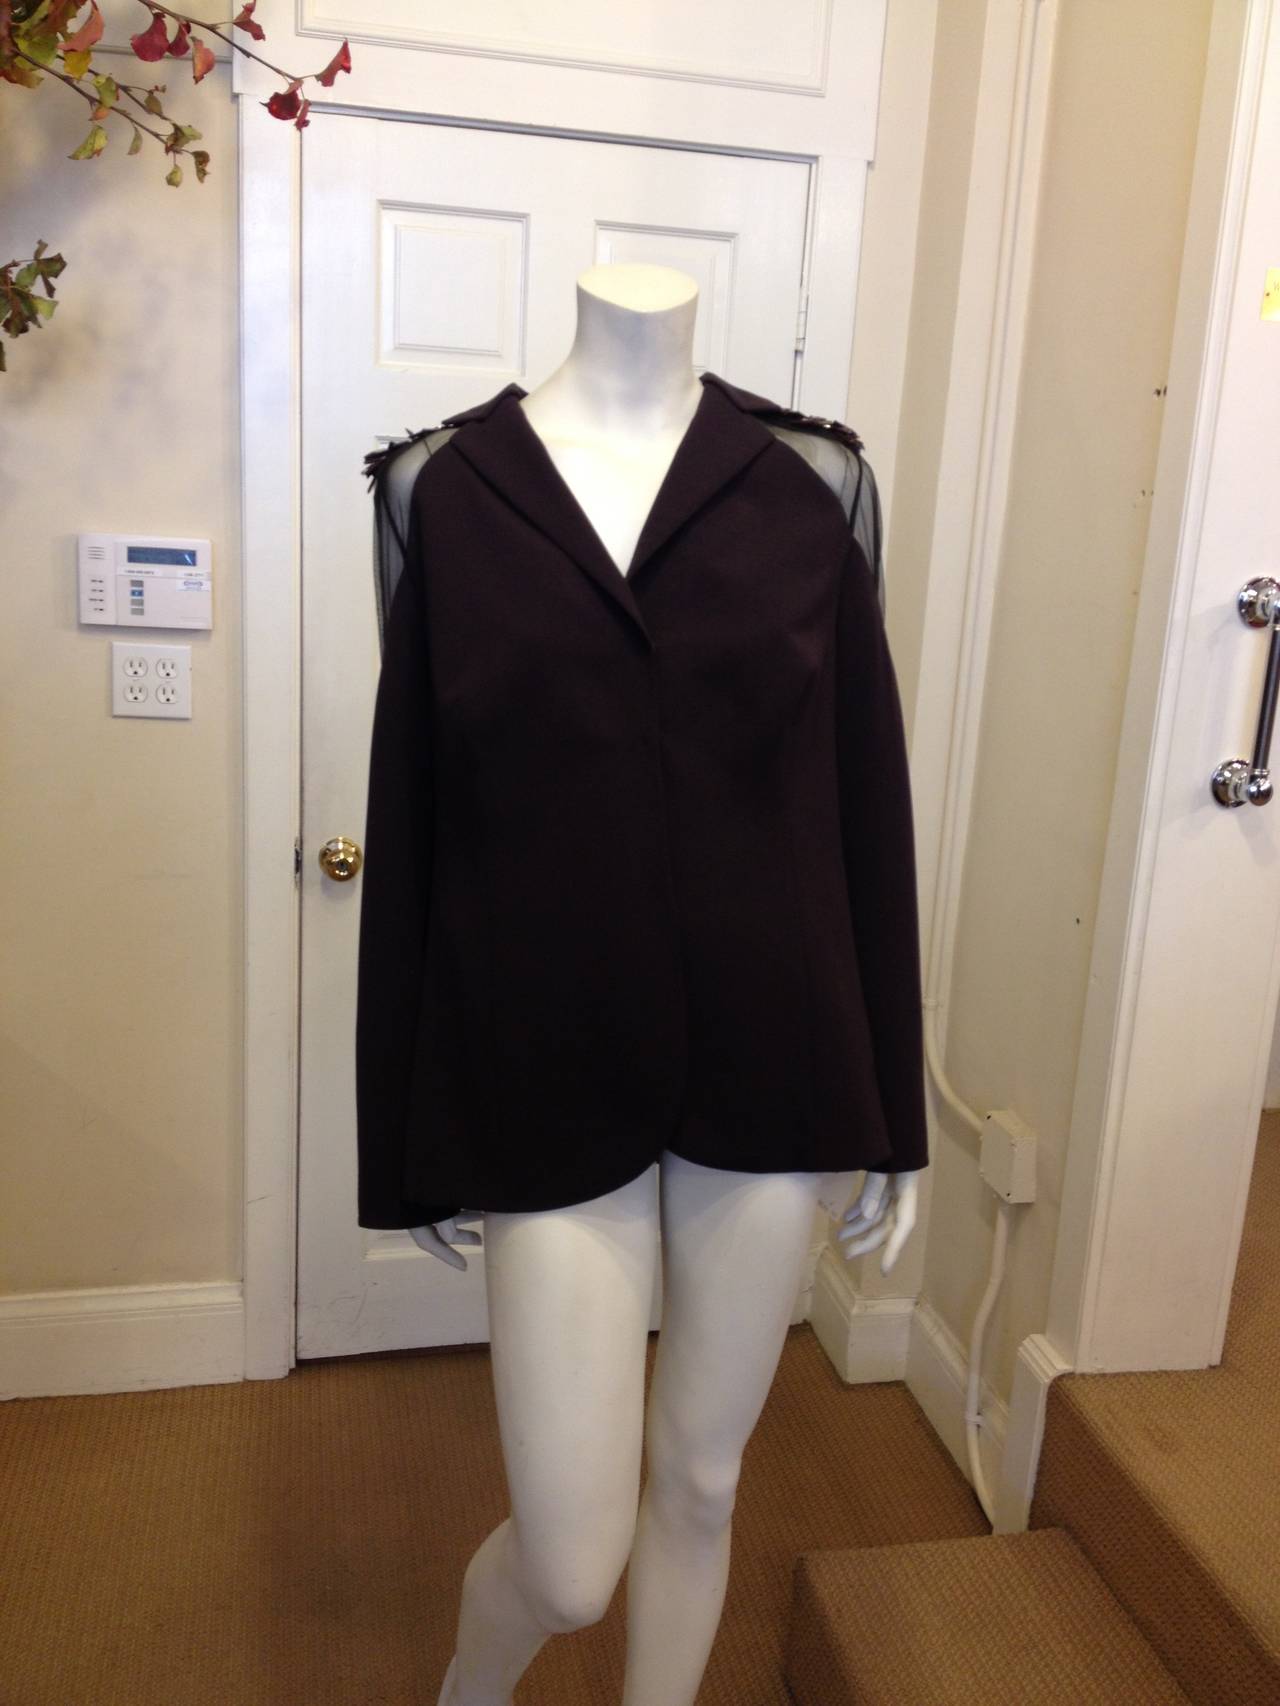 Women's Akris Maroon Jacket with Beads and Sheer Panels